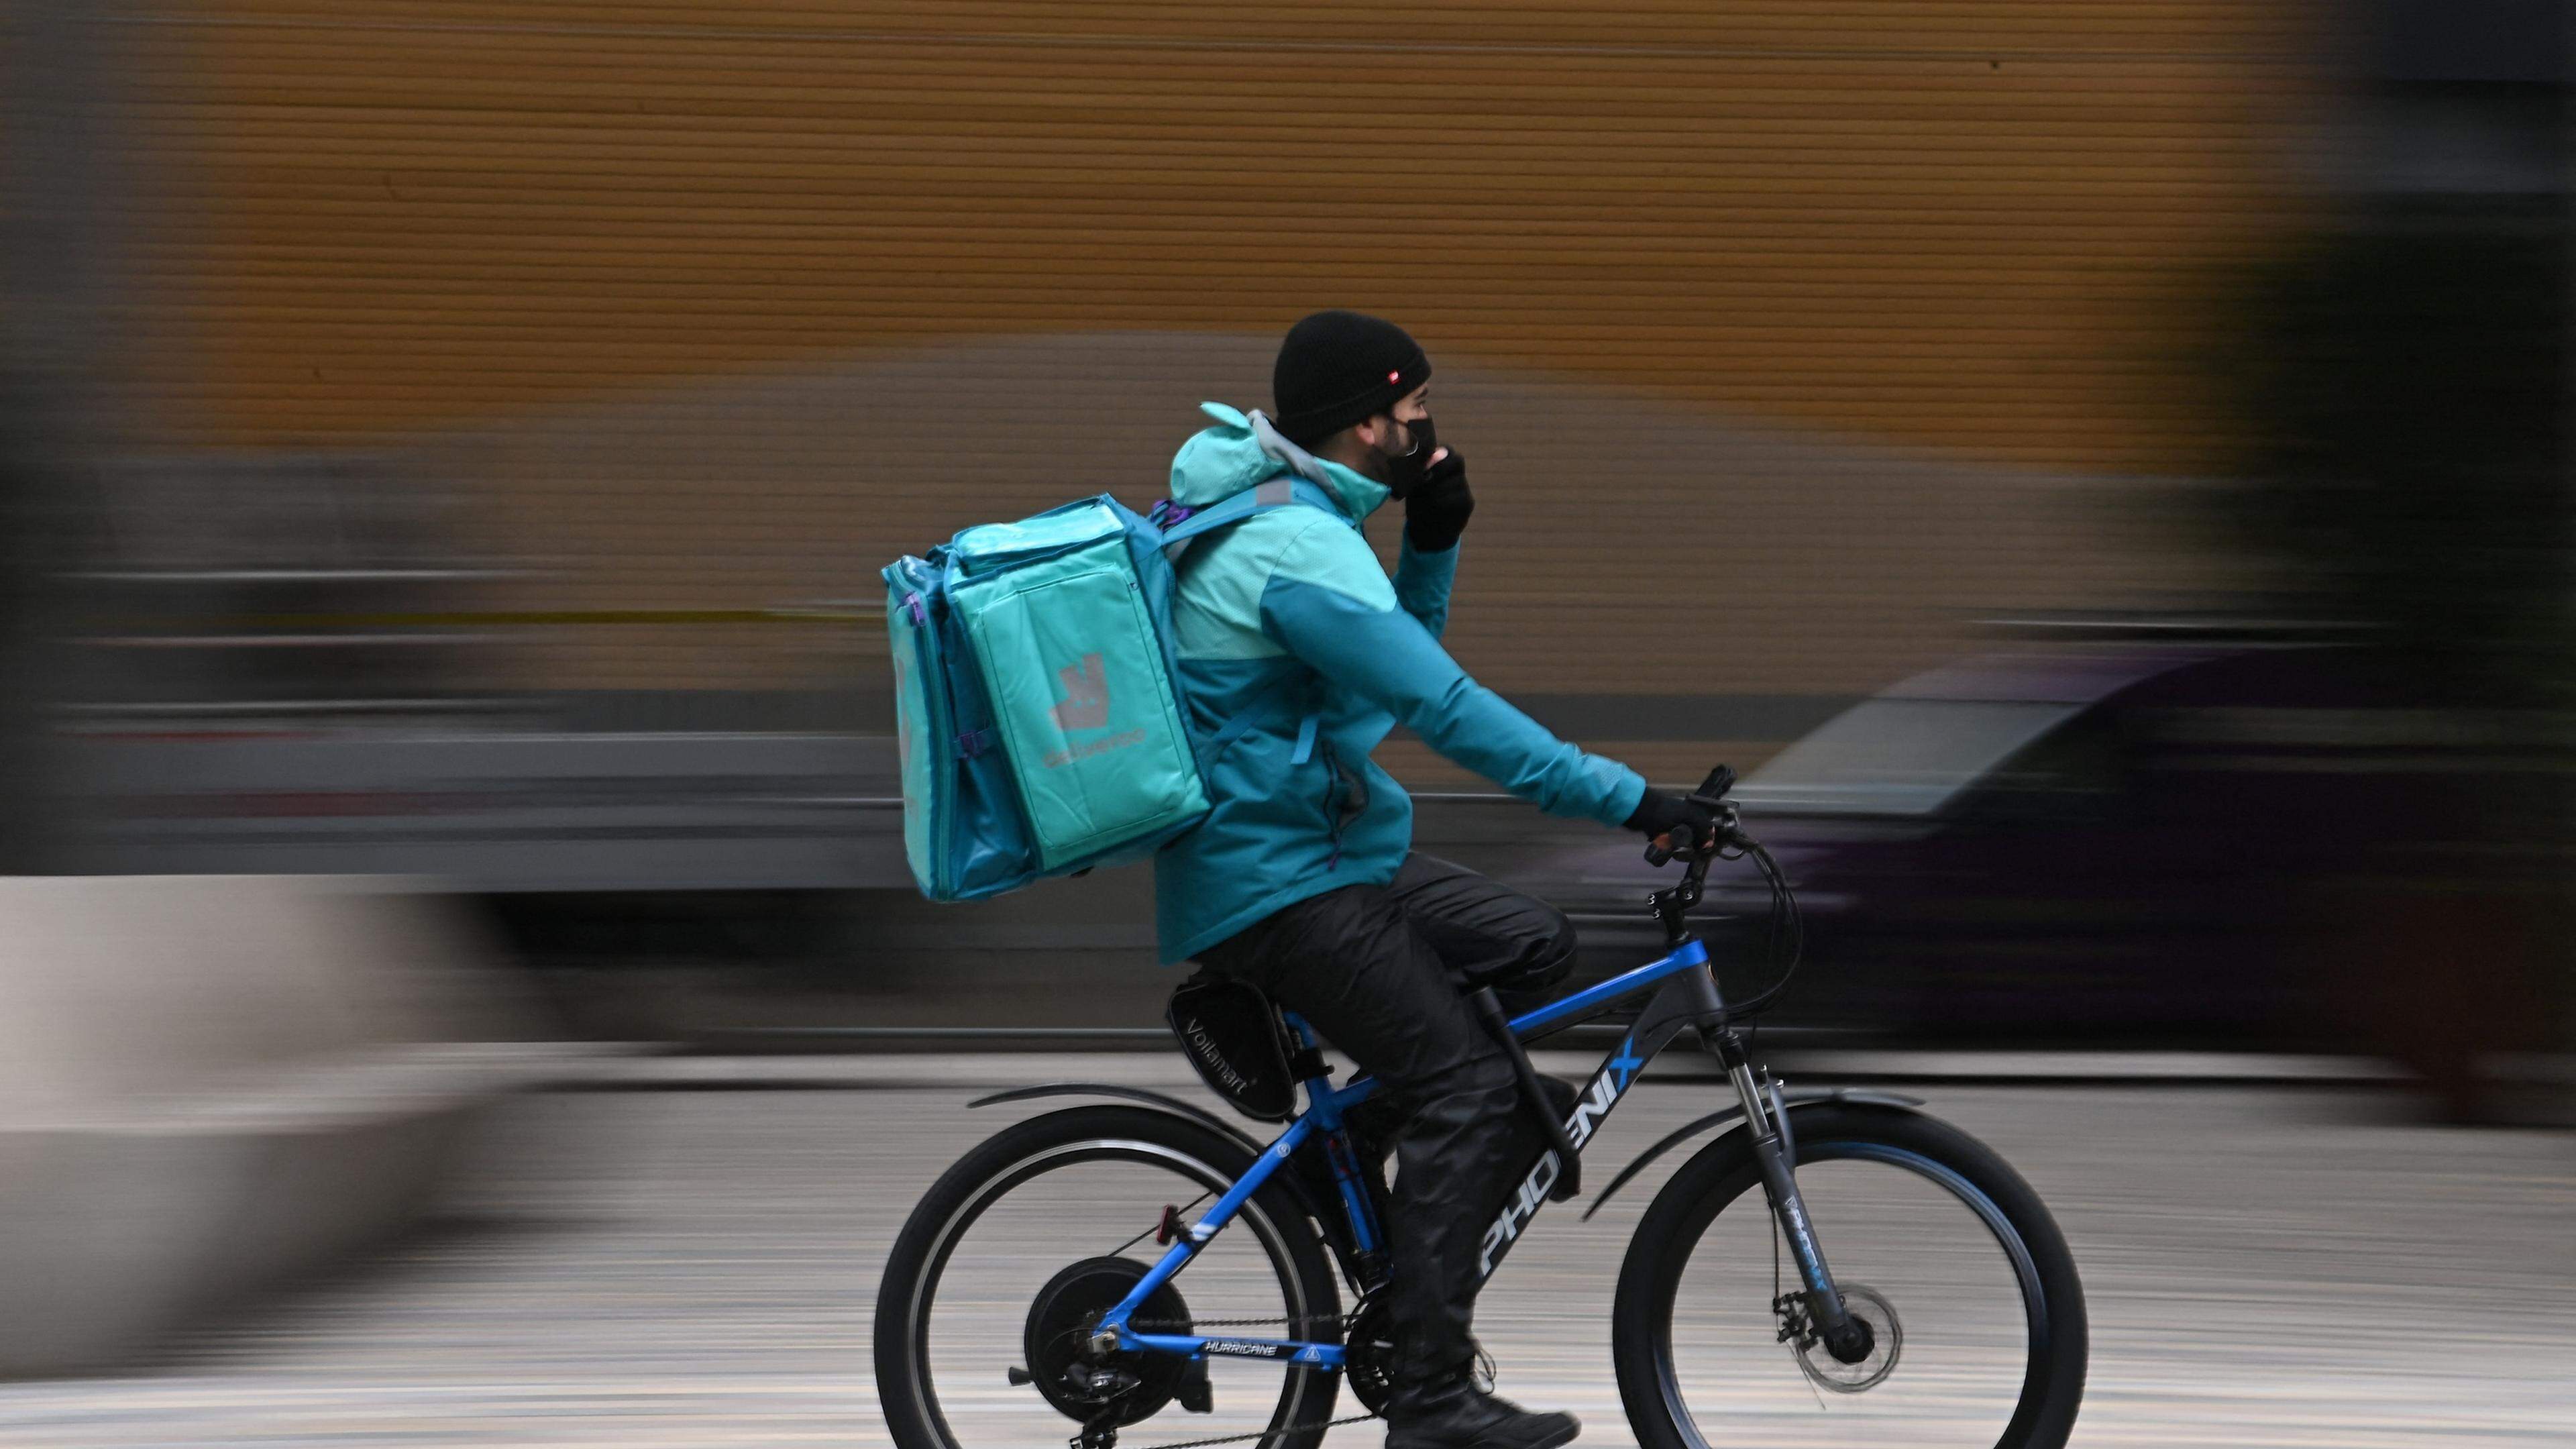 A Deliveroo rider cycles through central London, March 26, 2021.